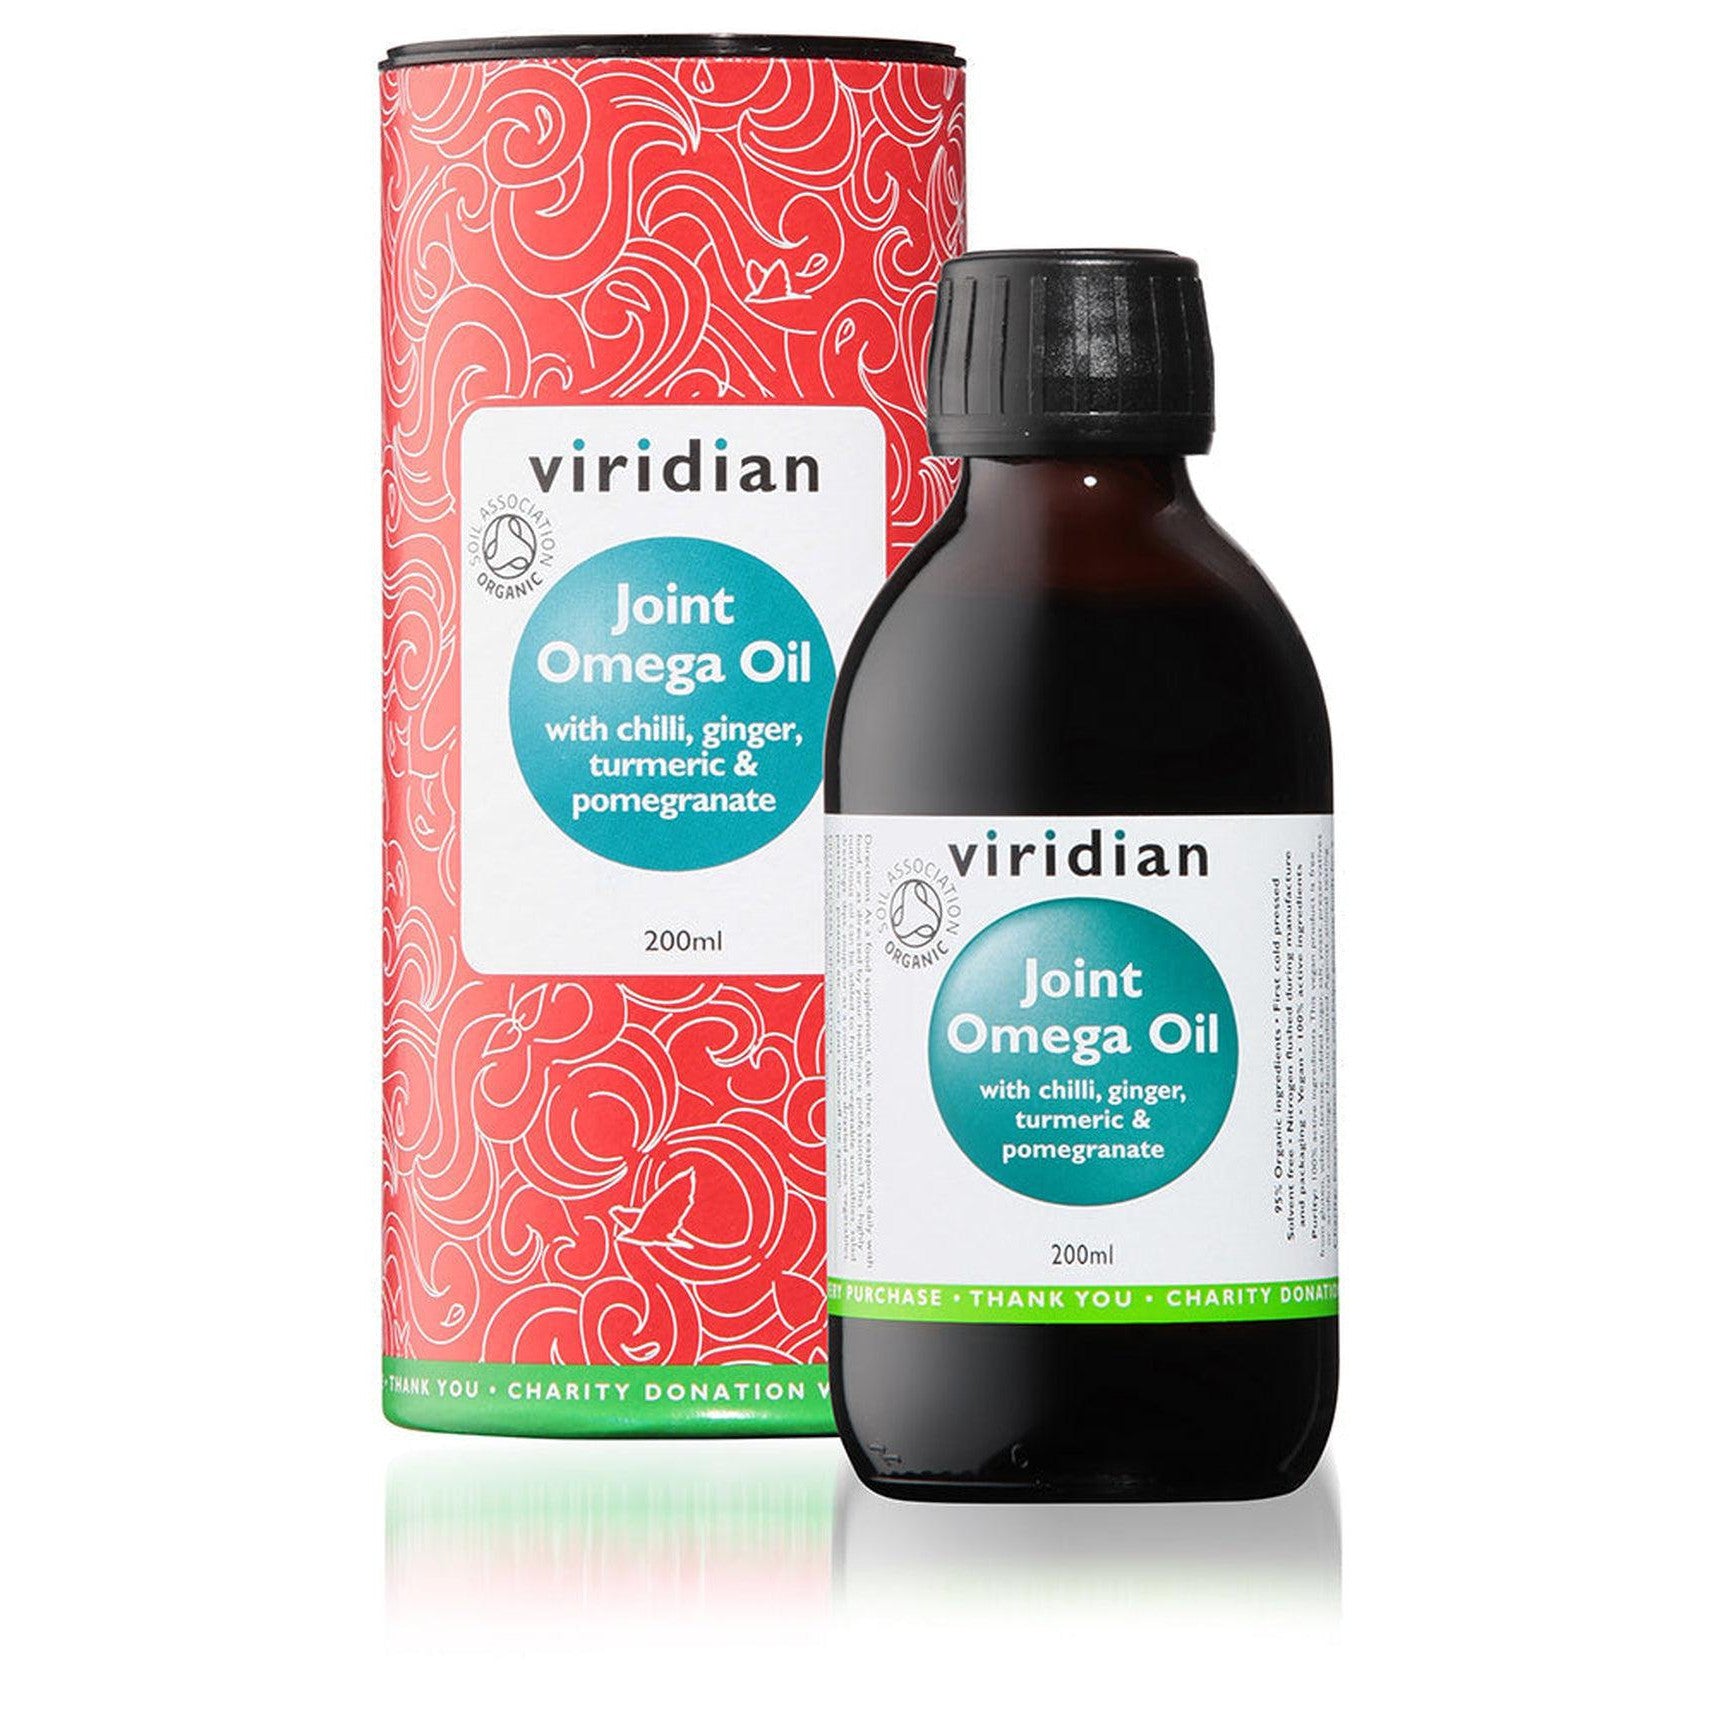 Viridian Organic Joint Omega Oil 200ml- Lillys Pharmacy and Health Store